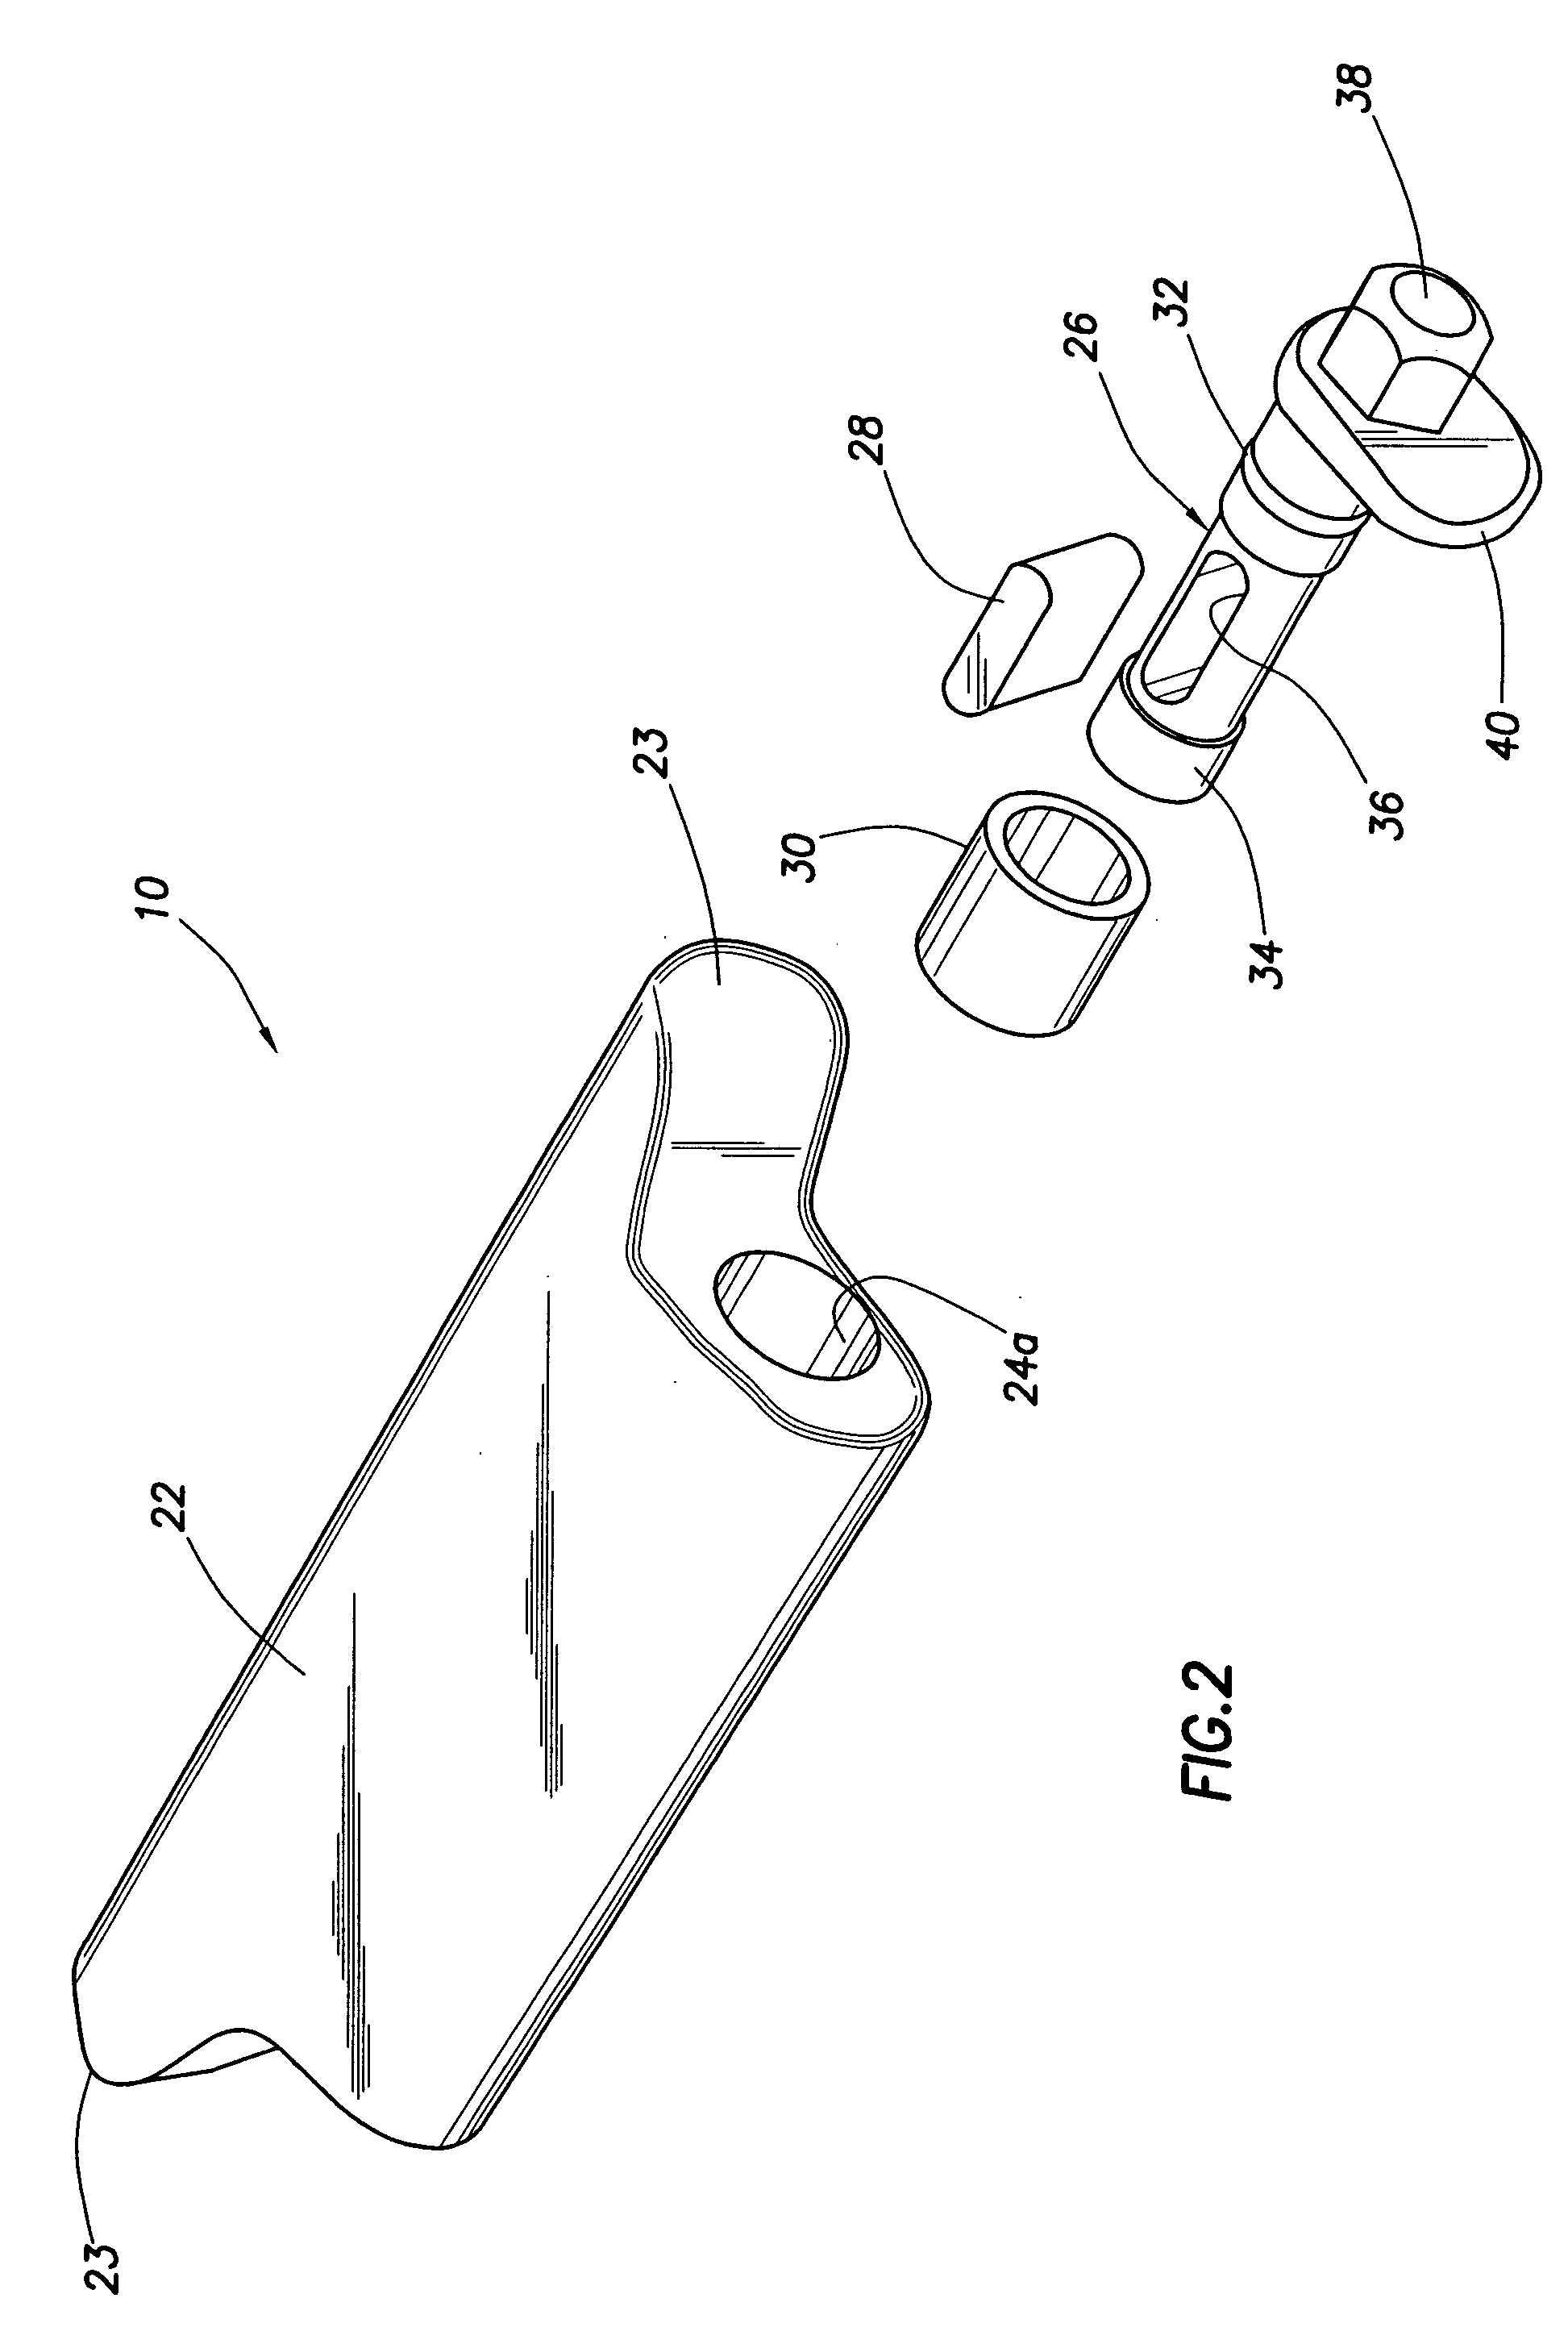 Connector pin assembly and associated apparatus